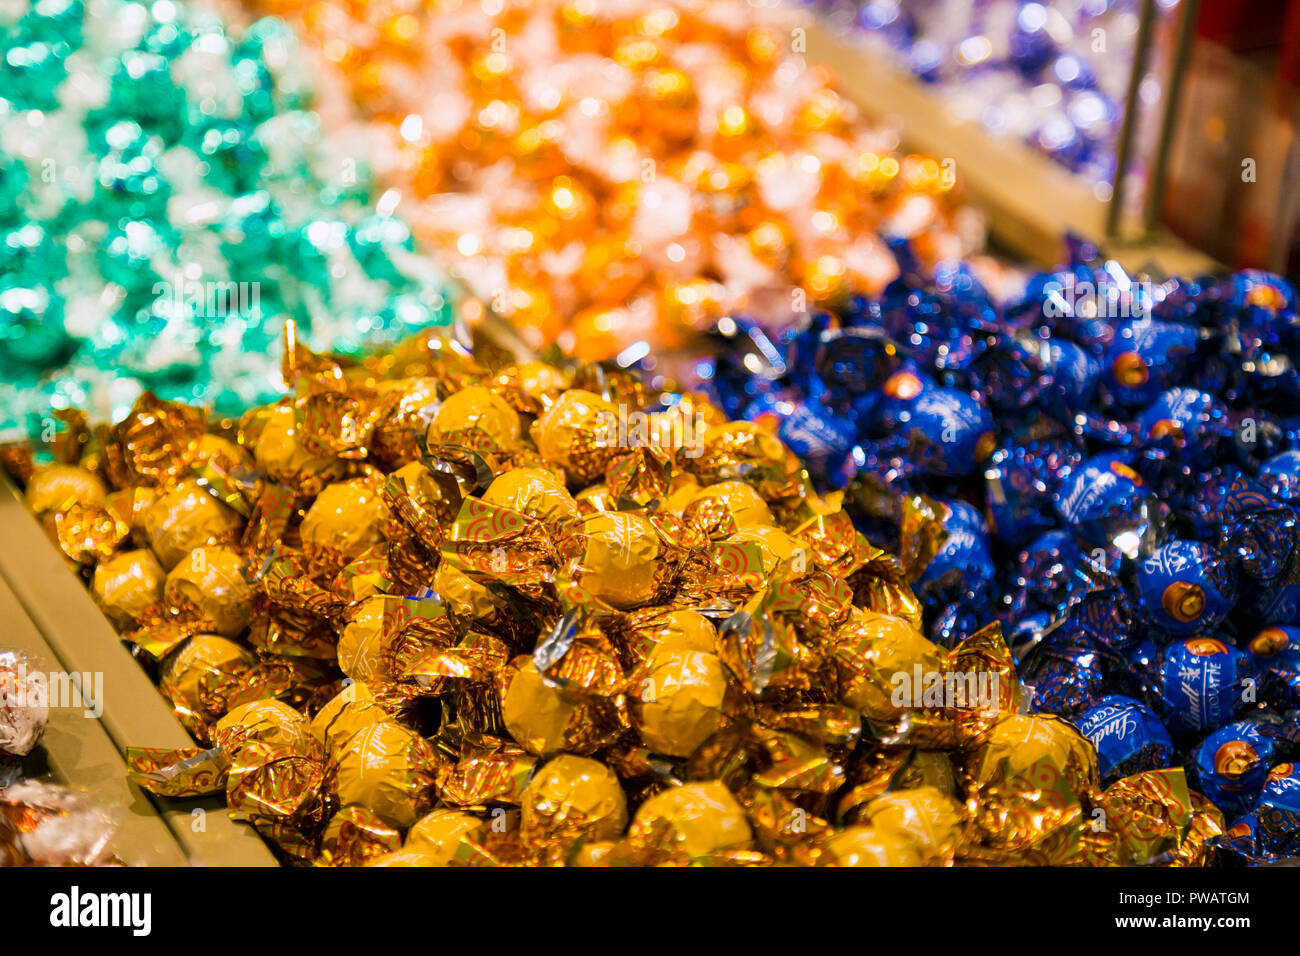 Heaps of wrapped Lindt chocolate sweets at El Corte Ingles department store in Barcelona, Spain Stock Photo